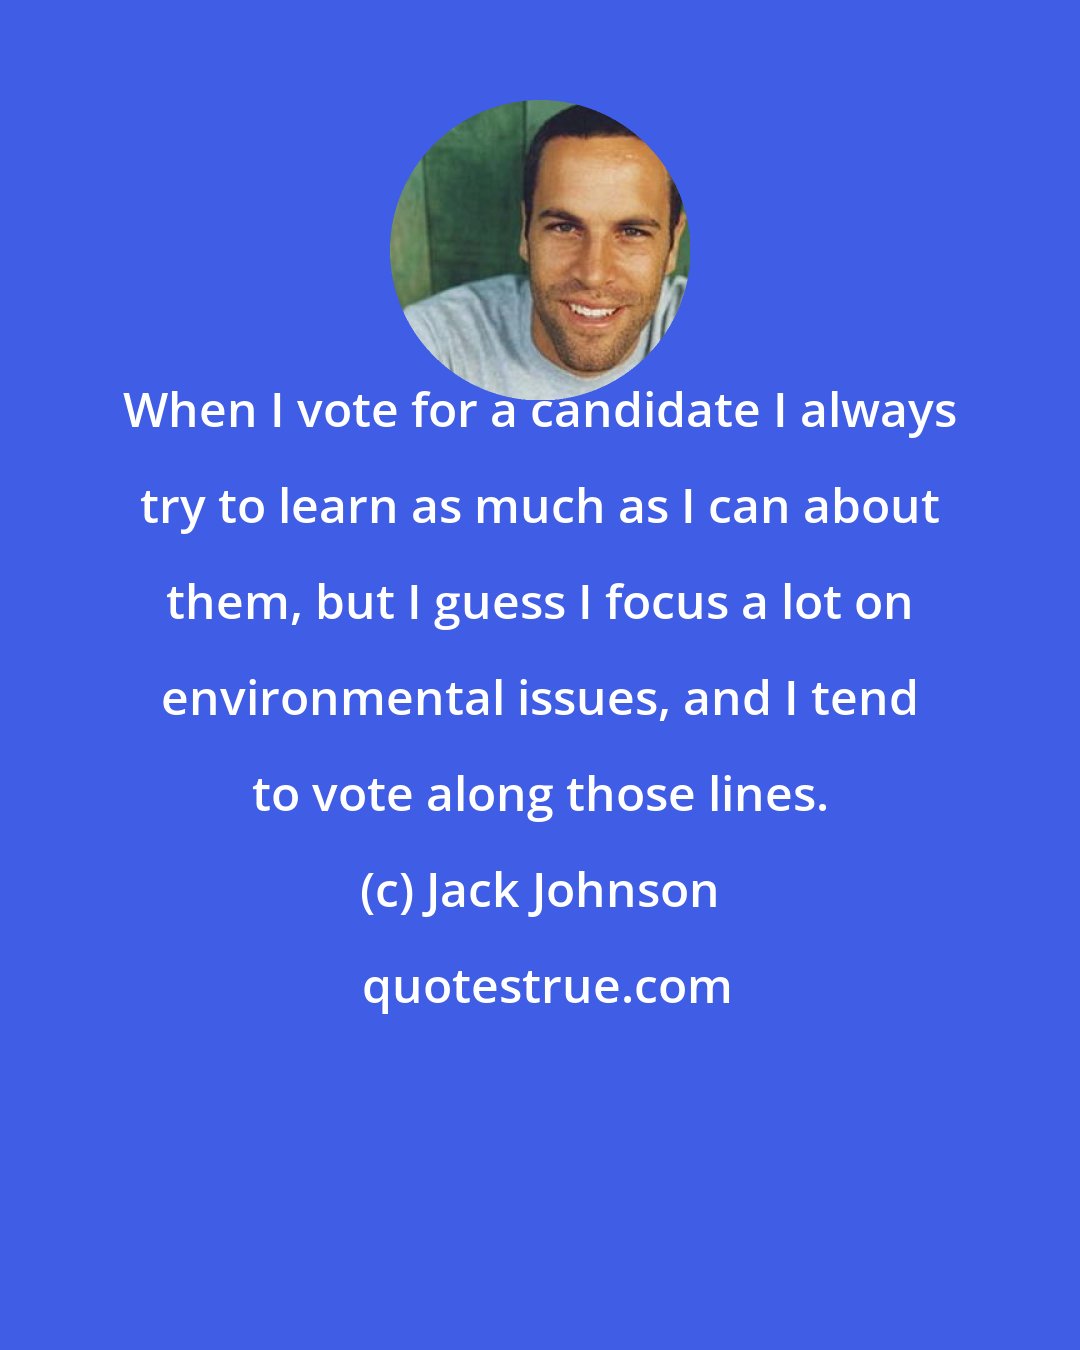 Jack Johnson: When I vote for a candidate I always try to learn as much as I can about them, but I guess I focus a lot on environmental issues, and I tend to vote along those lines.